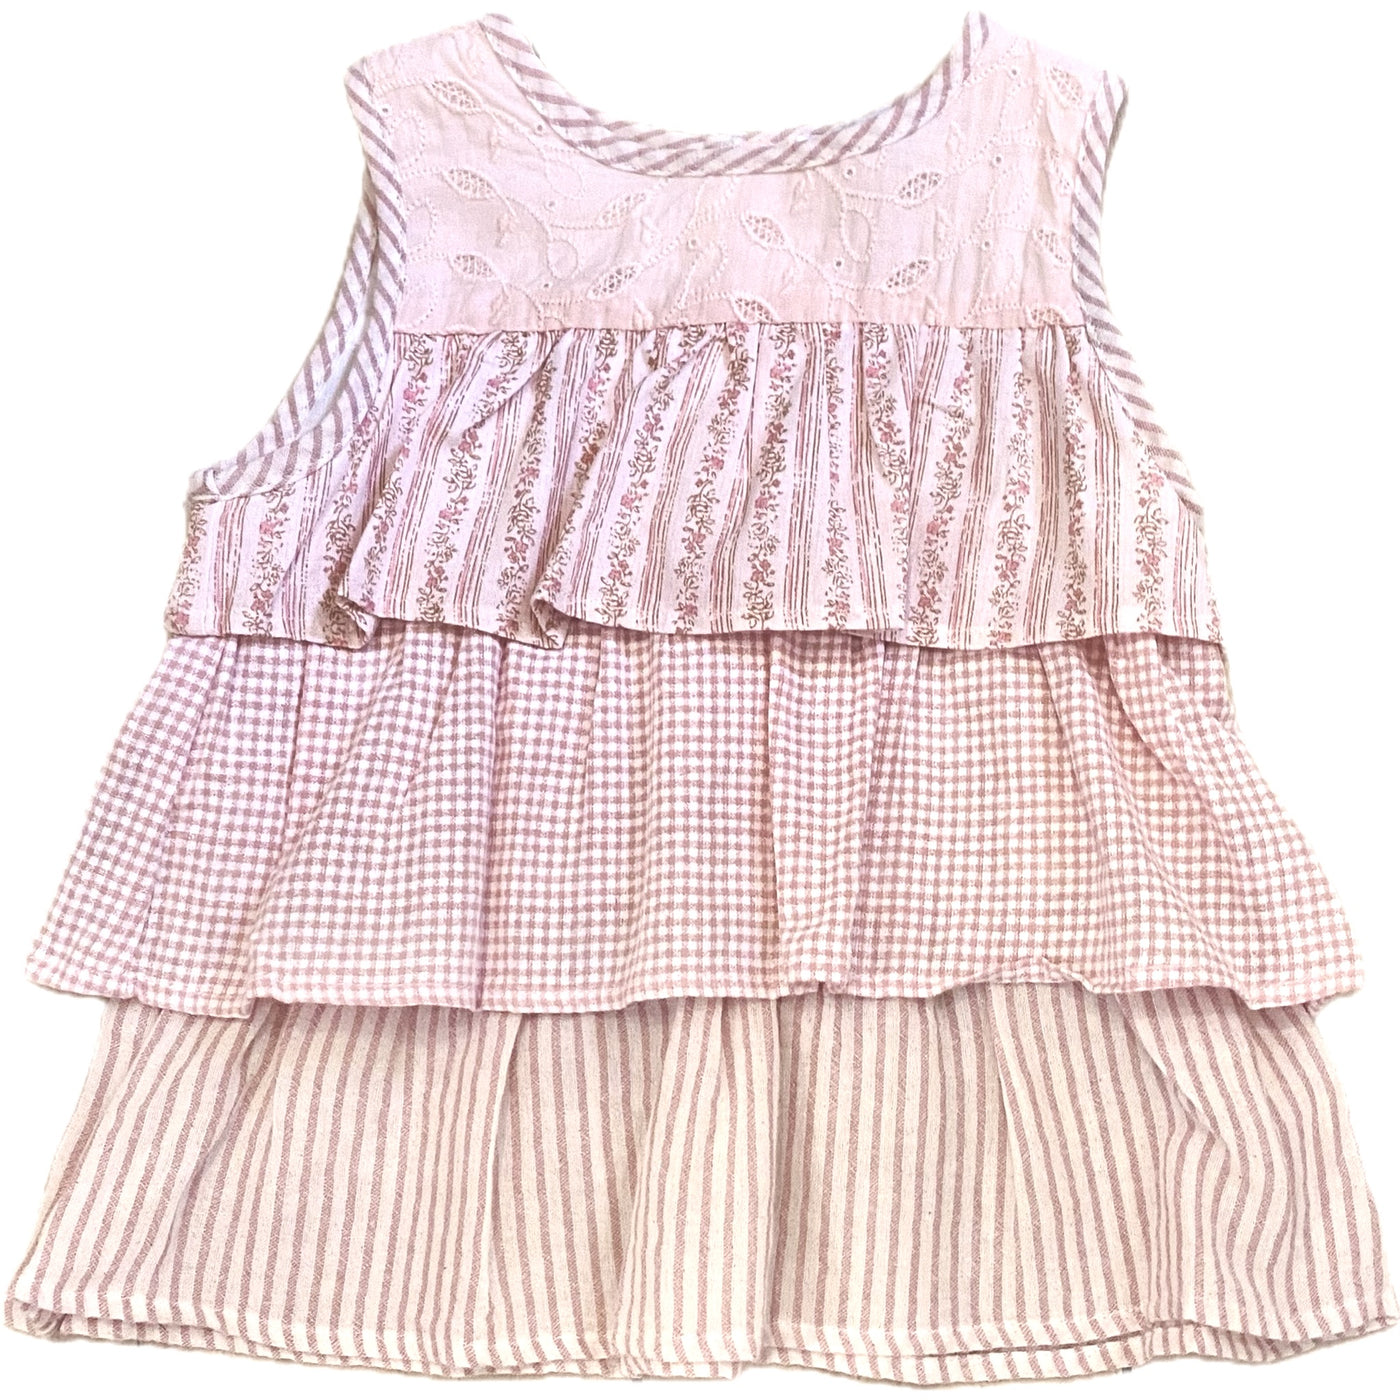 London Pink Frilly top